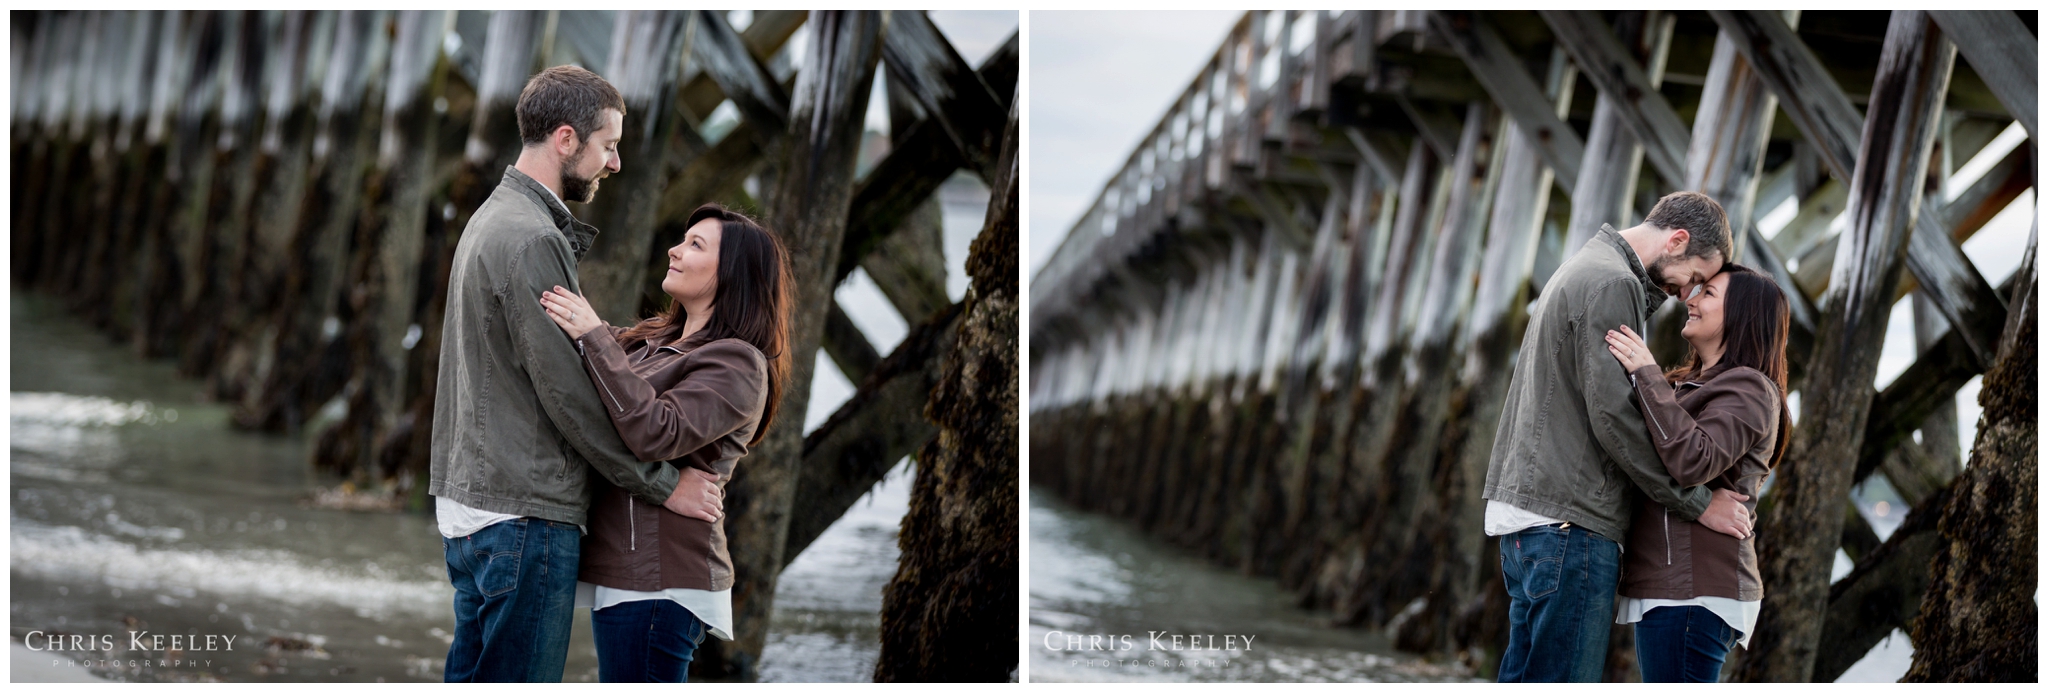 kittery-maine-fort-foster-engagement-photography-session-wedding-photographer-chris-keeley03.jpg